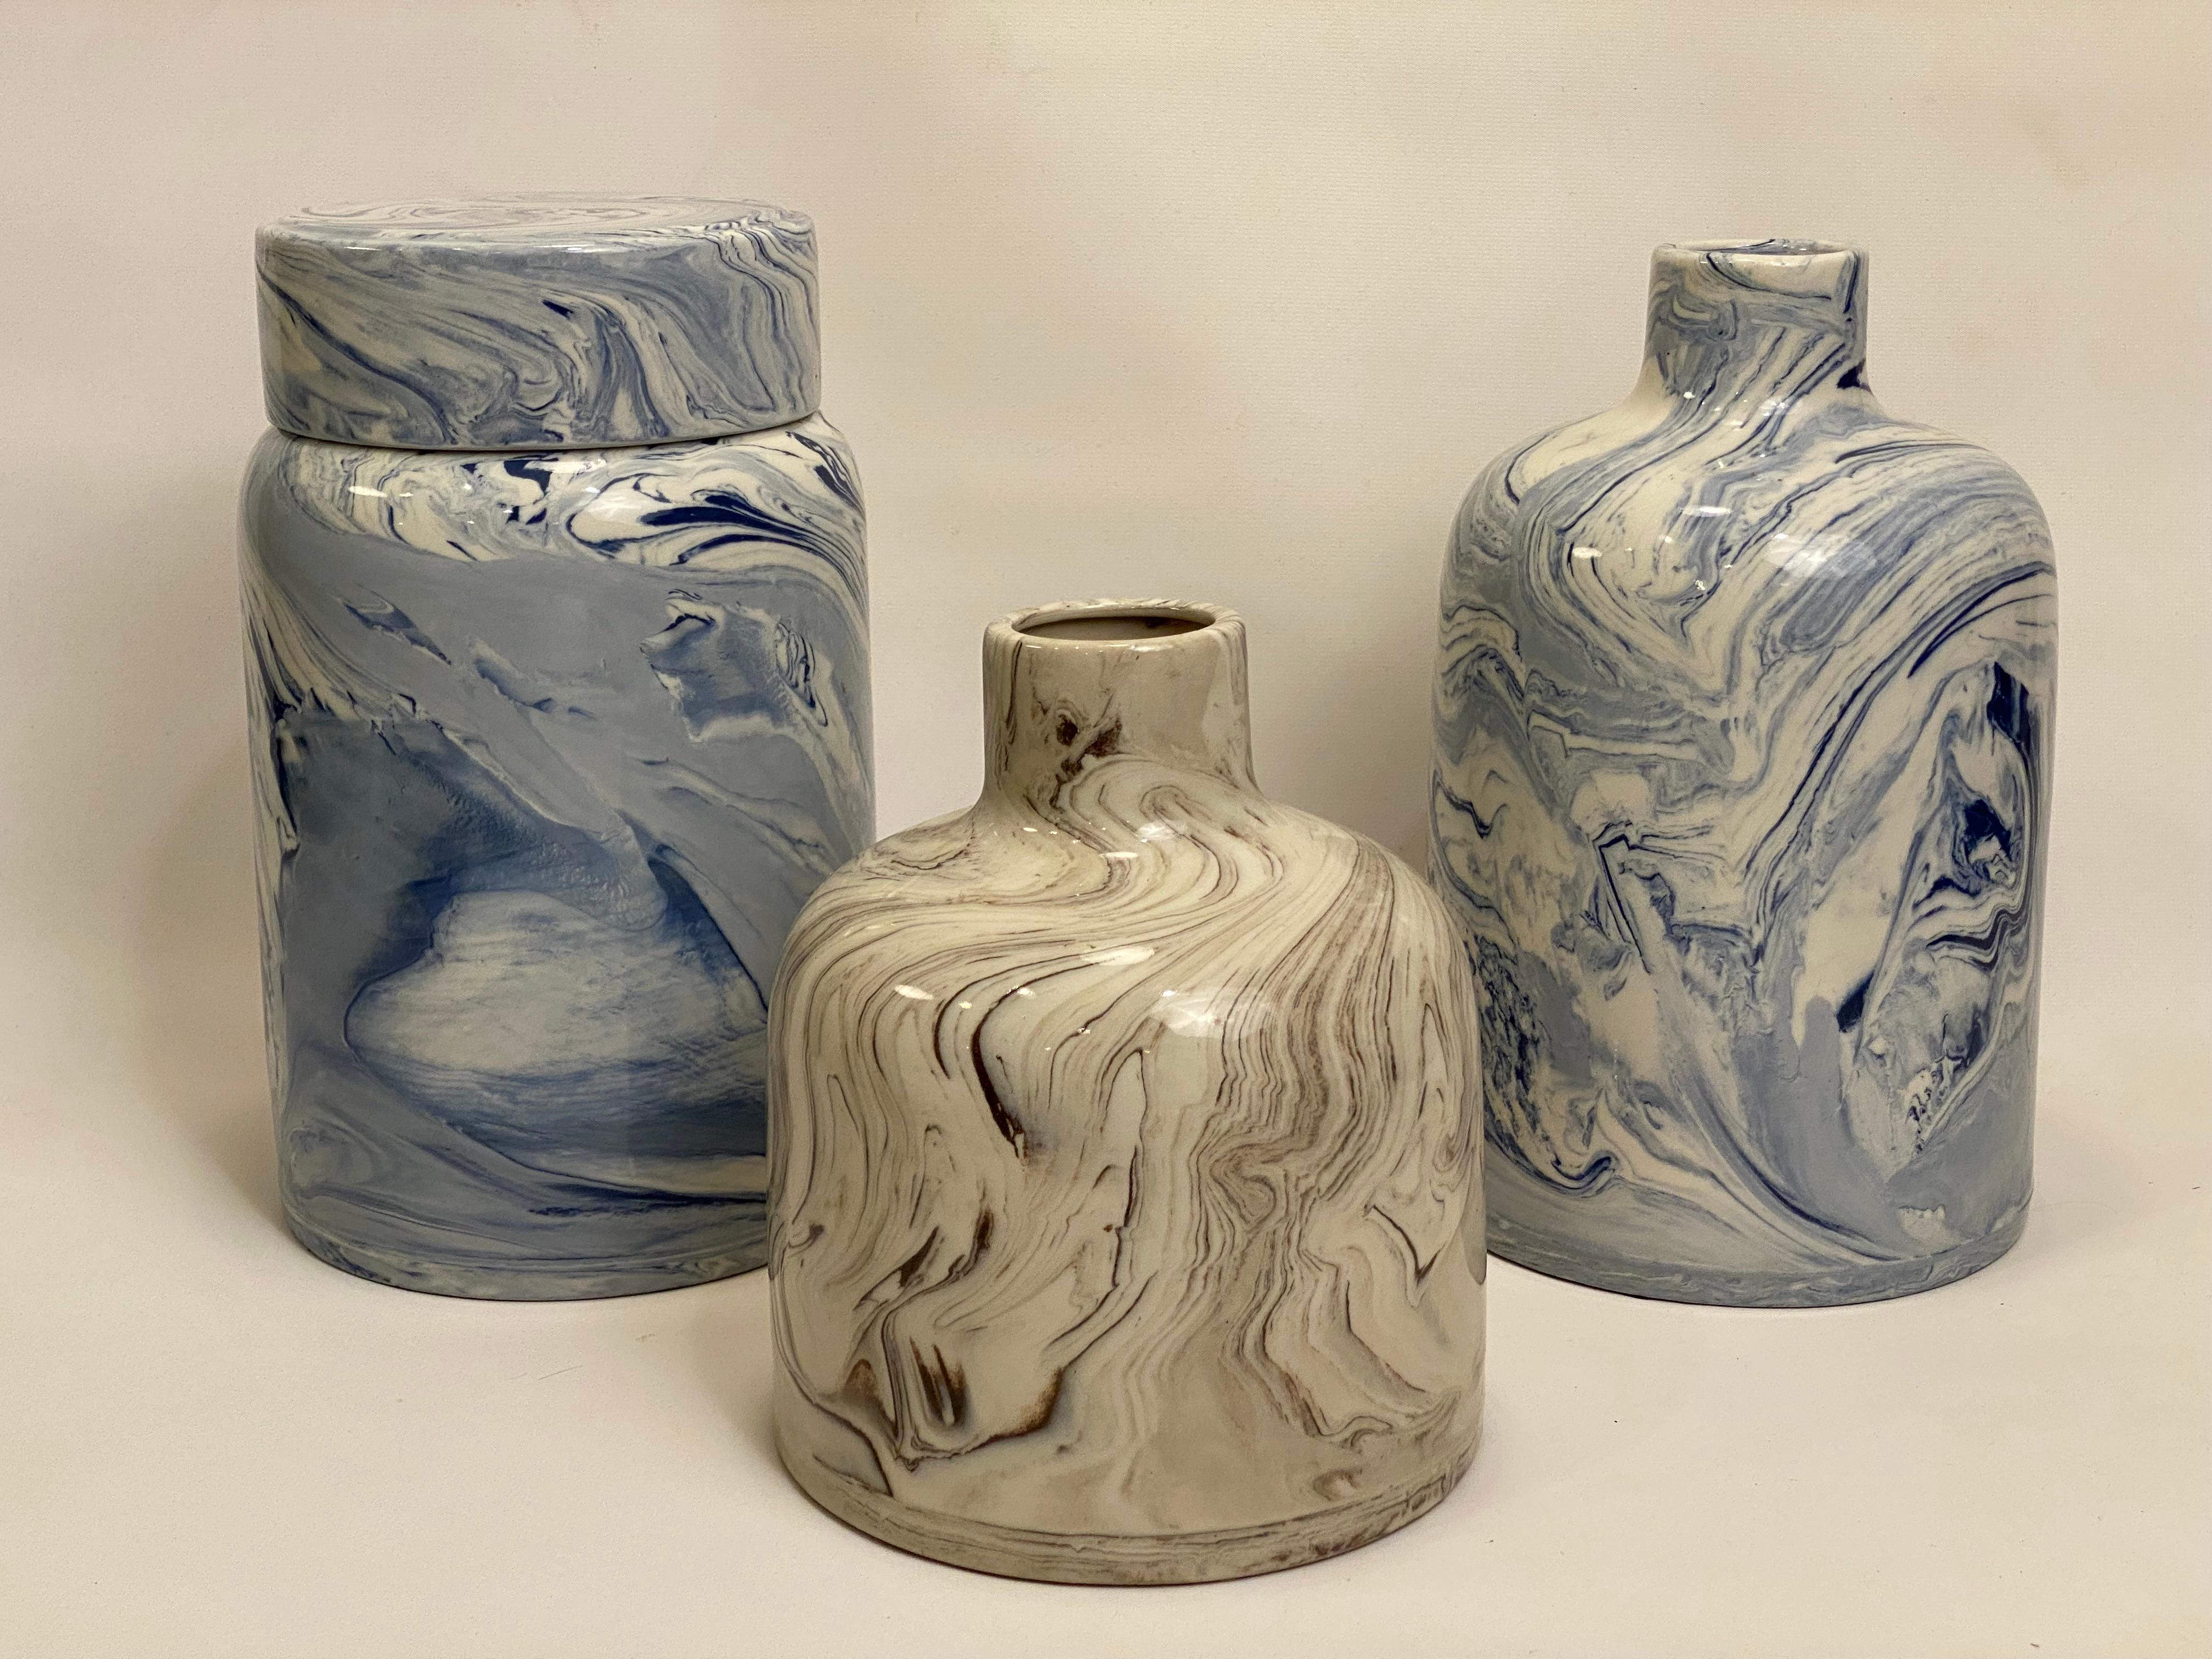 A grouping of three marbleized ceramics vessels. These pieces preserve the art and technique of the old Turkish tradition of paper marbeling and other surfaces. Circa 1980-90. The large blue vase retains a partial label. These are in good overall